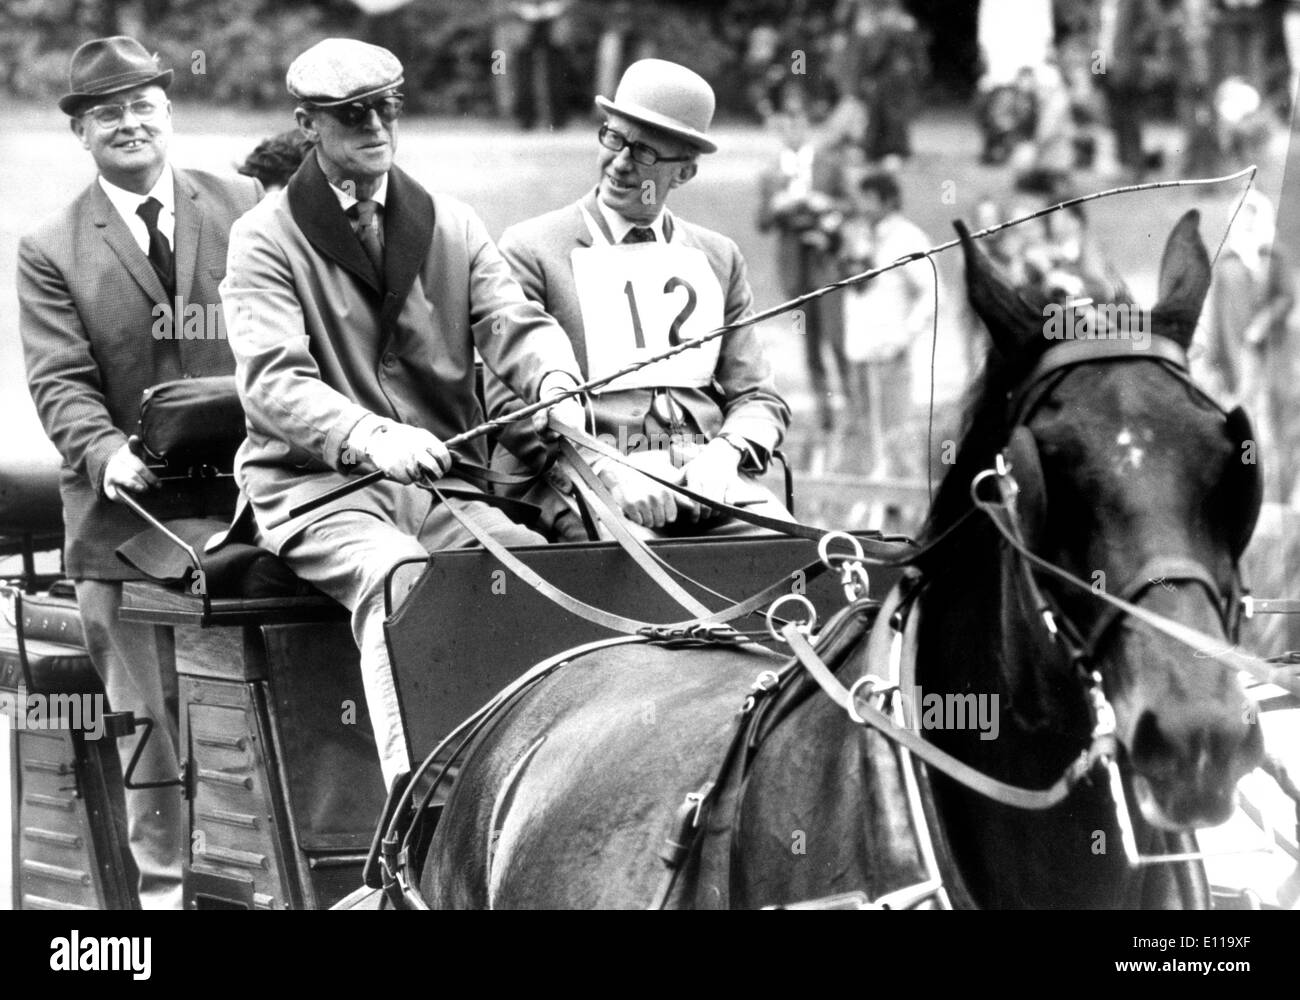 Prince Philip in horse race at royal horse show Stock Photo